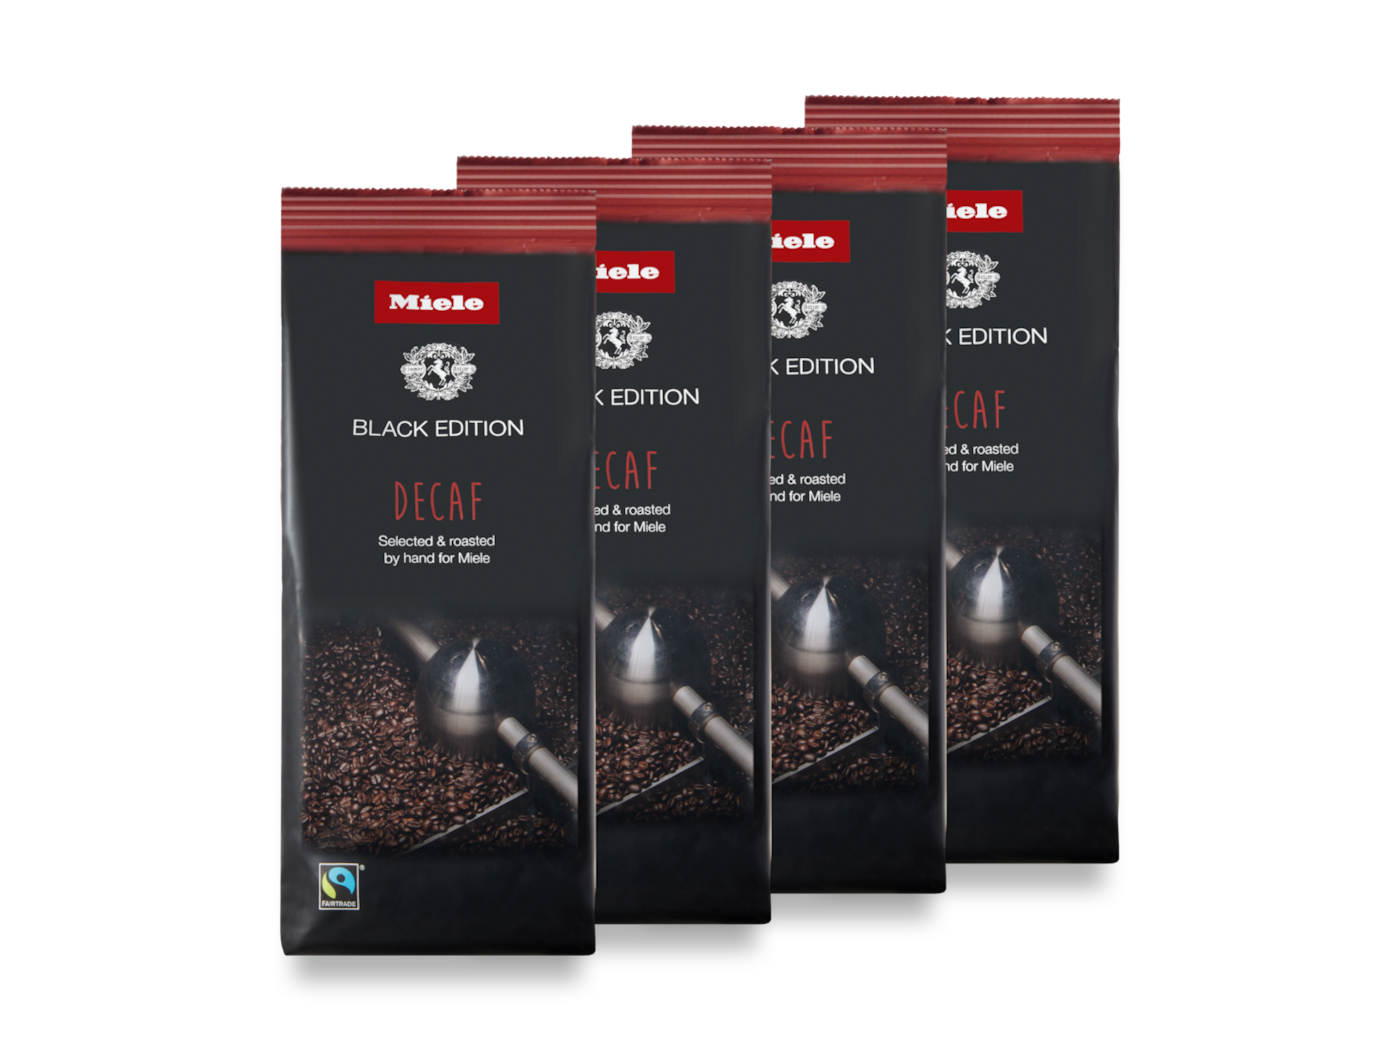 Miele Black Edition DECAF 4x250g product photo